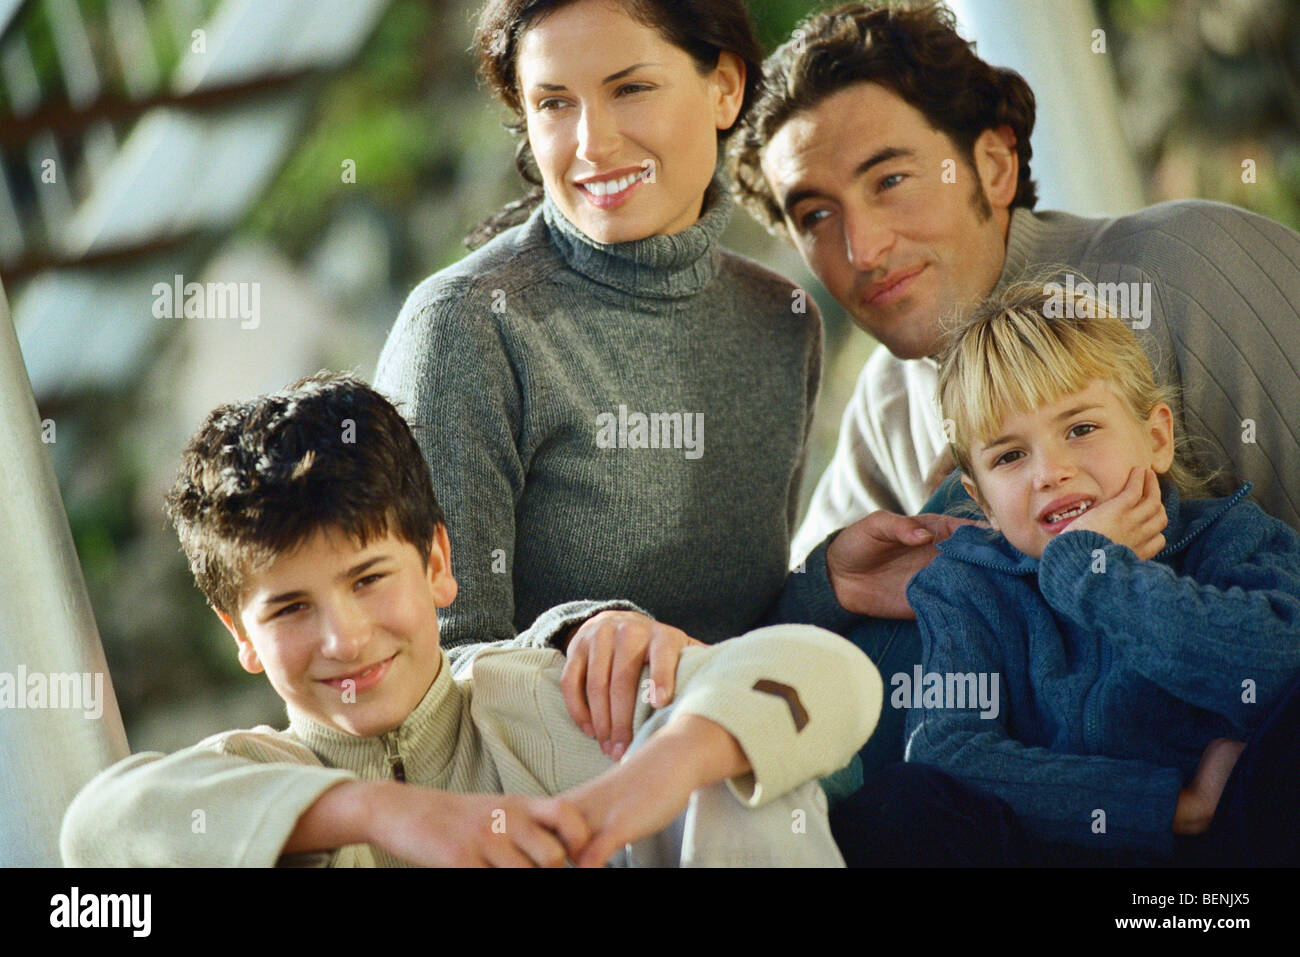 Family together outdoors, portrait Stock Photo